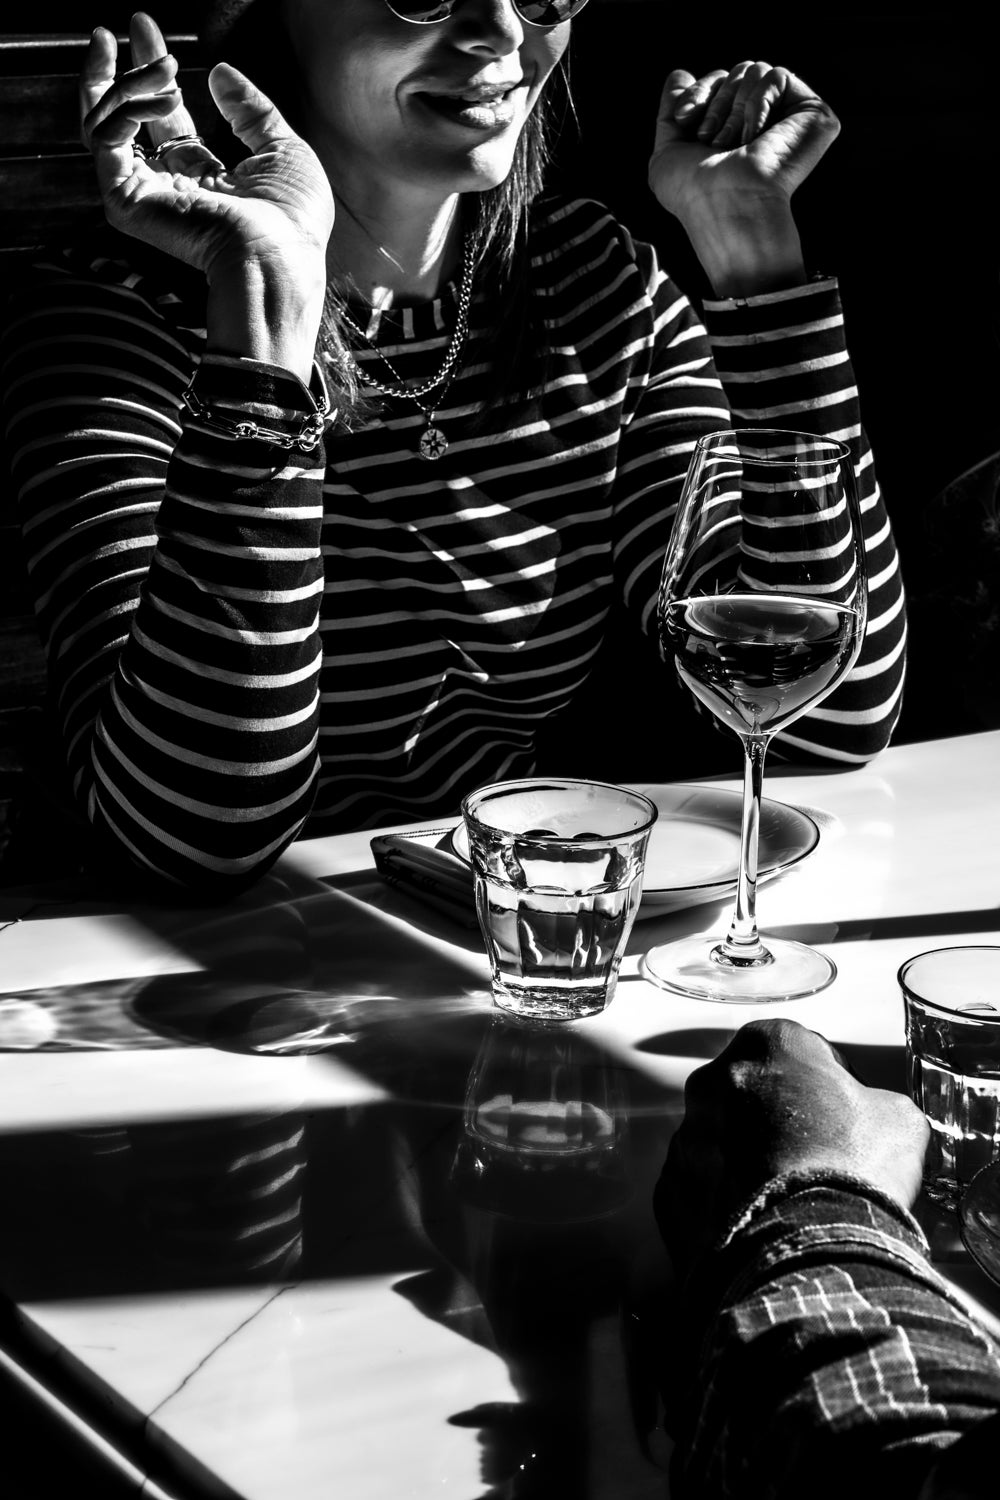 Black and white table with a glass of wine